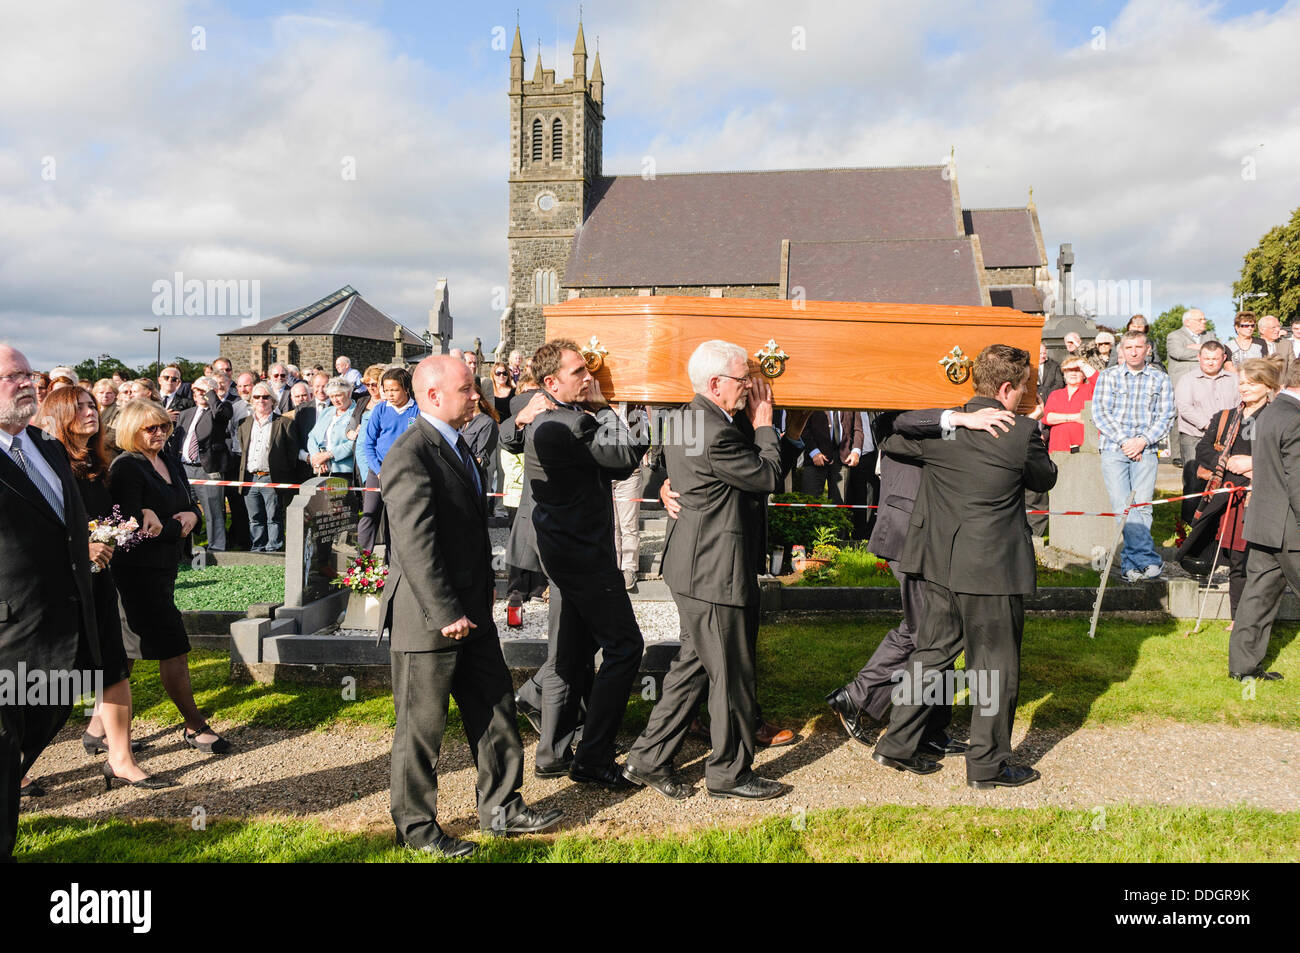 Bellaghy, Northern Ireland. 2nd September 2013 - The coffin of poet Seamus Heaney is carried through the grounds of St Mary's Church where he was laid to rest in his native town of Bellaghy. Credit:  Stephen Barnes/Alamy Live News Stock Photo